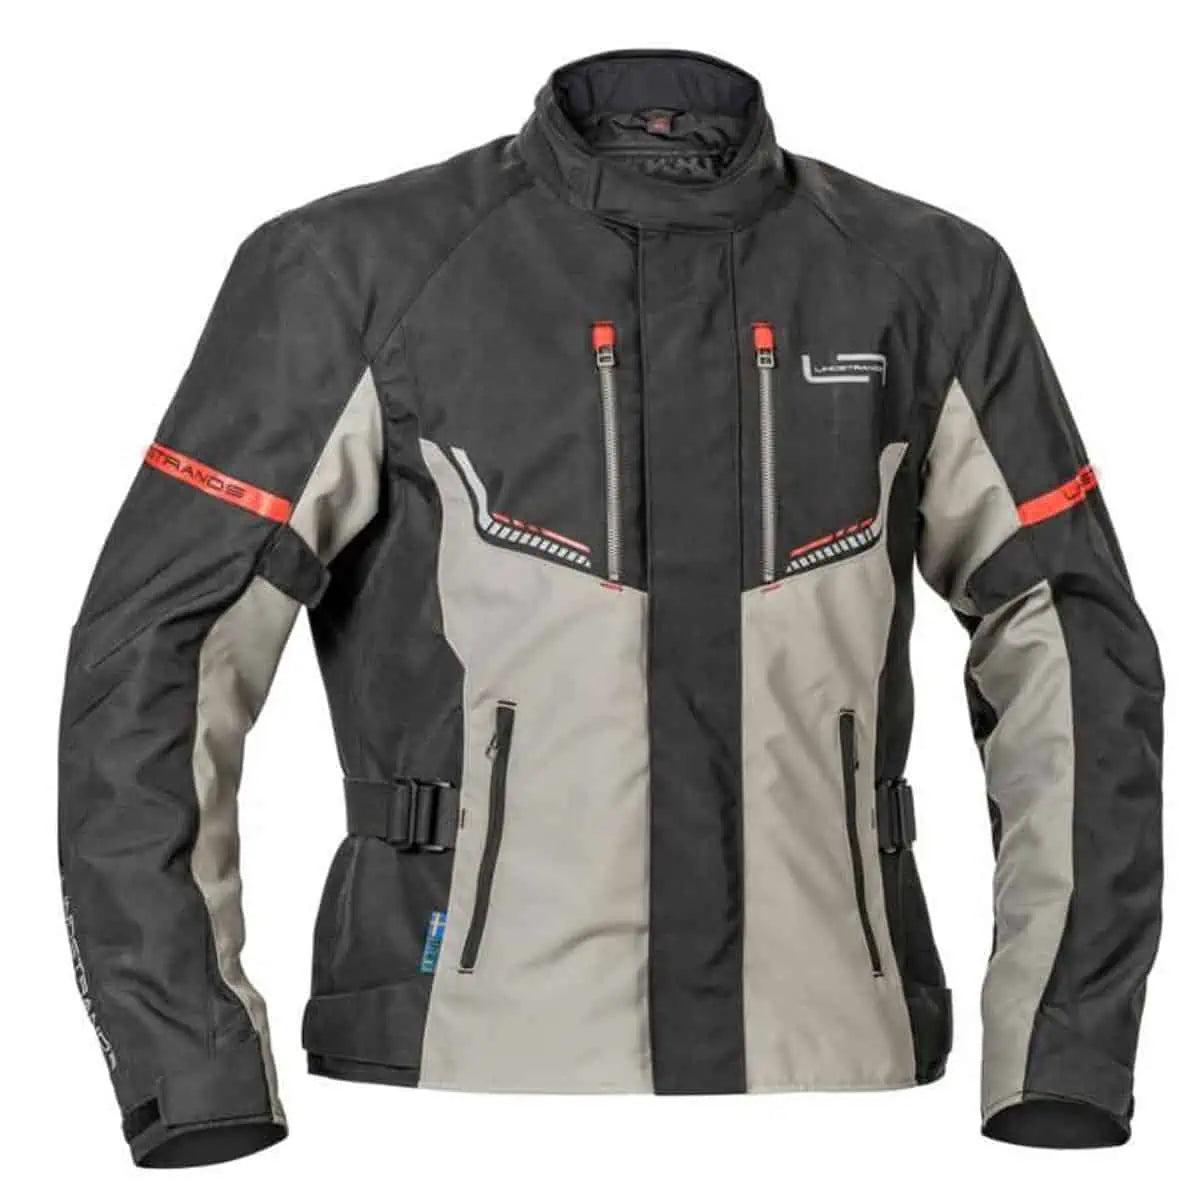 The Lindstrands Lomsen: A fully-featured textile motorcycling jacket